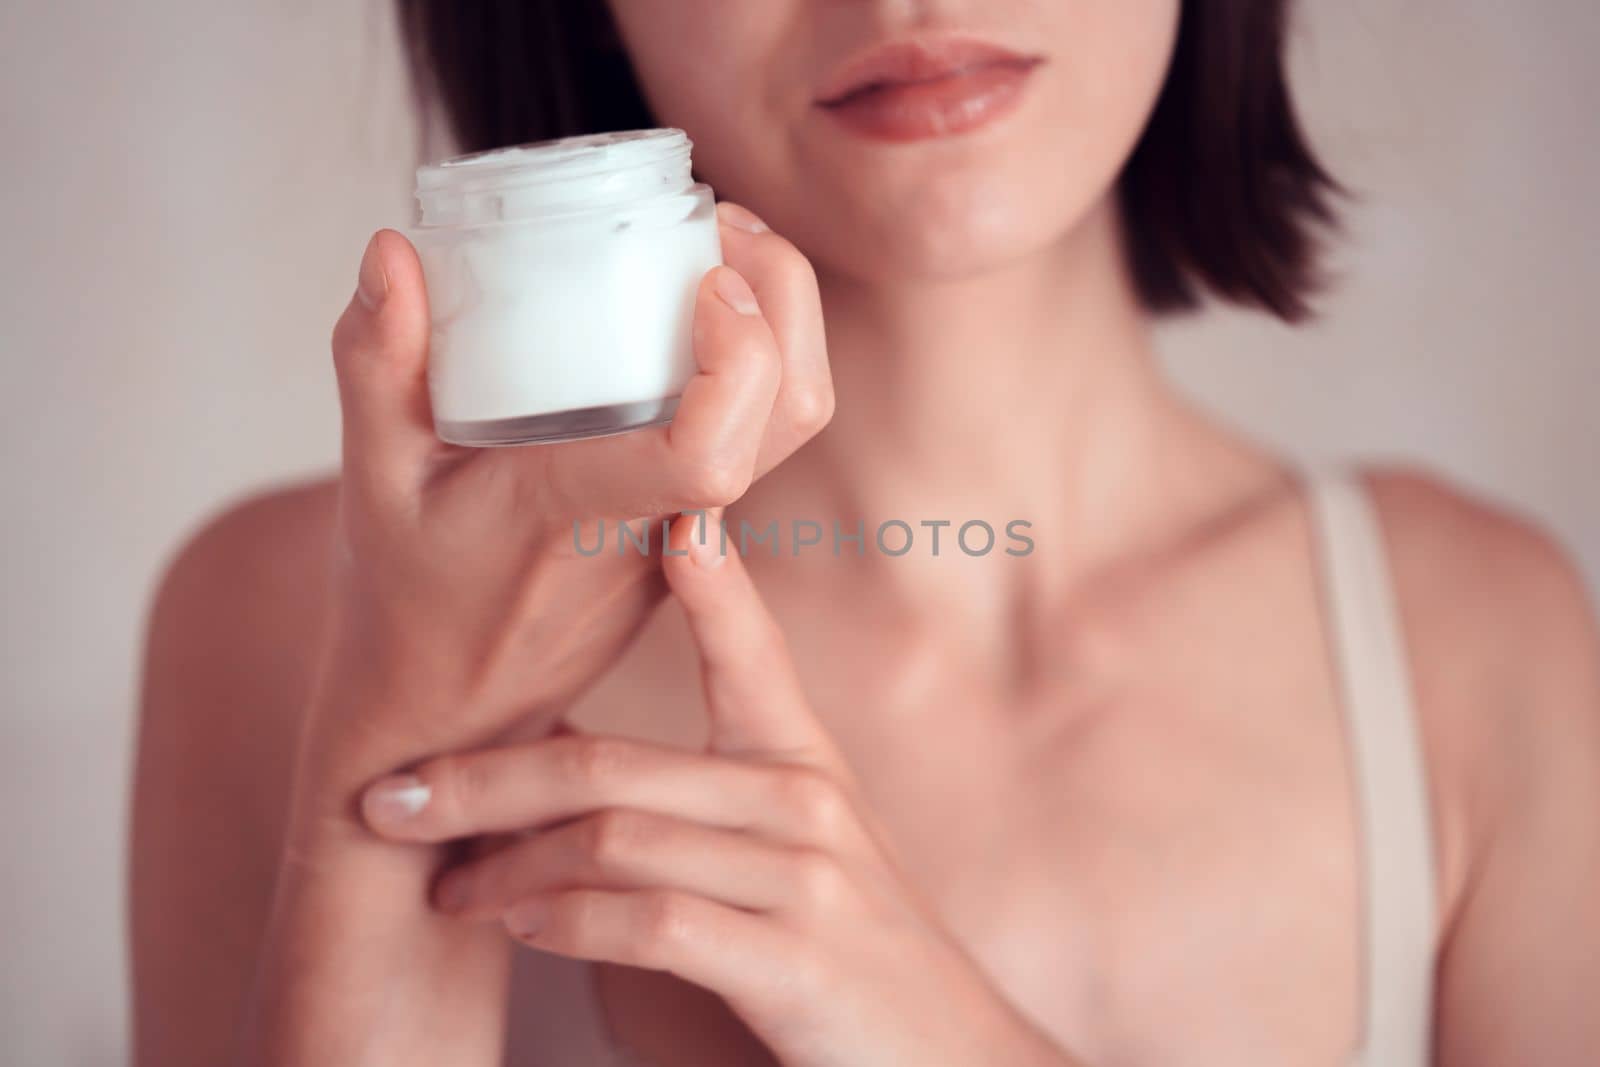 A young girl holds a jar of cream in her hands, applies a moisturizing balm to the body and face, takes care of beauty and health, close-up.